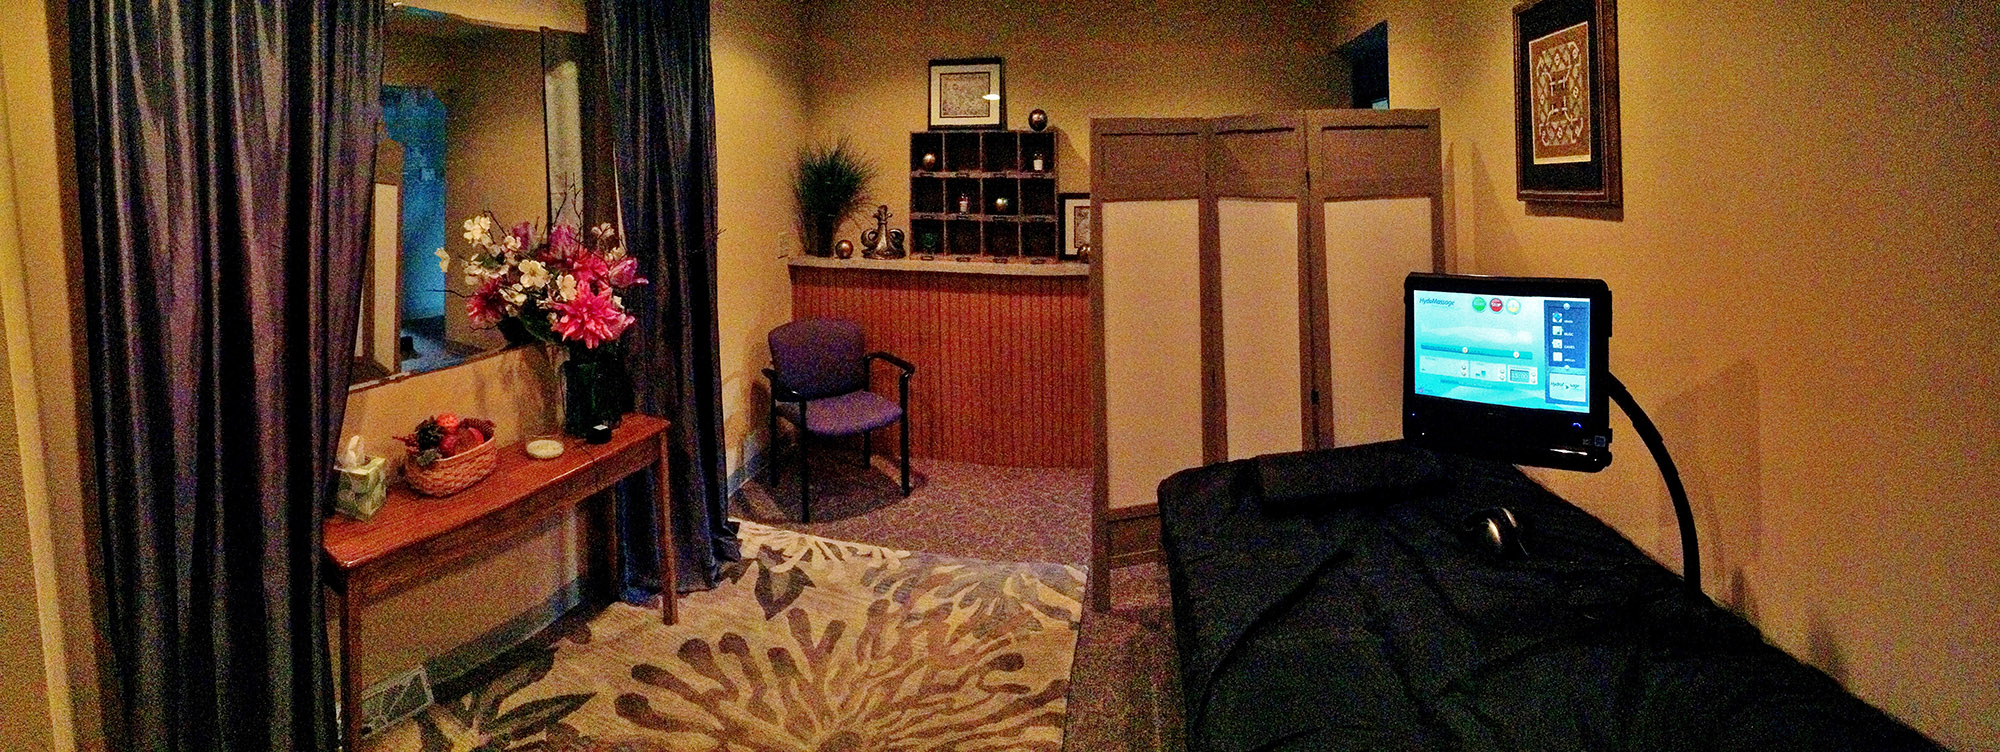 ProAdjuster Chiropractic Clinic HydroMassage Room, Watertown, WI